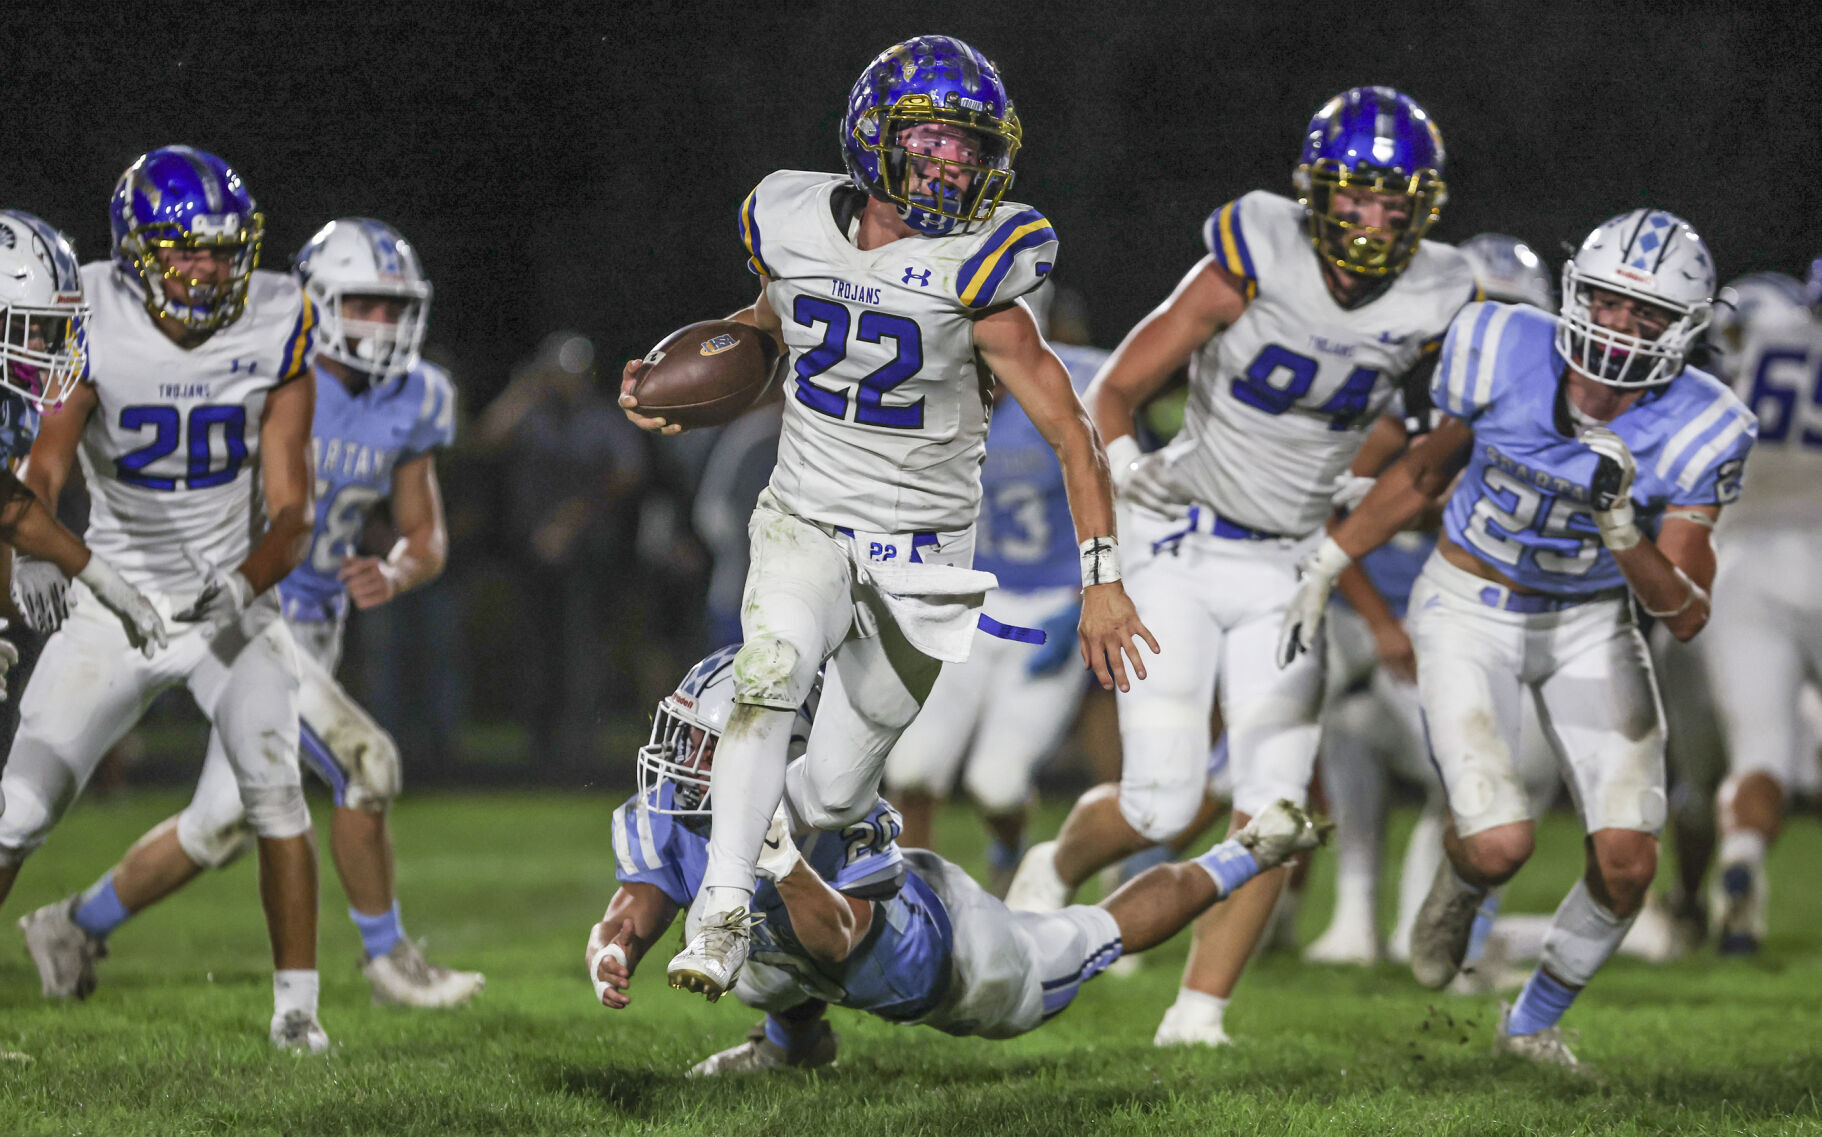 Kaiden Maurer leads Maroa-Forsyth to victory with impressive performance